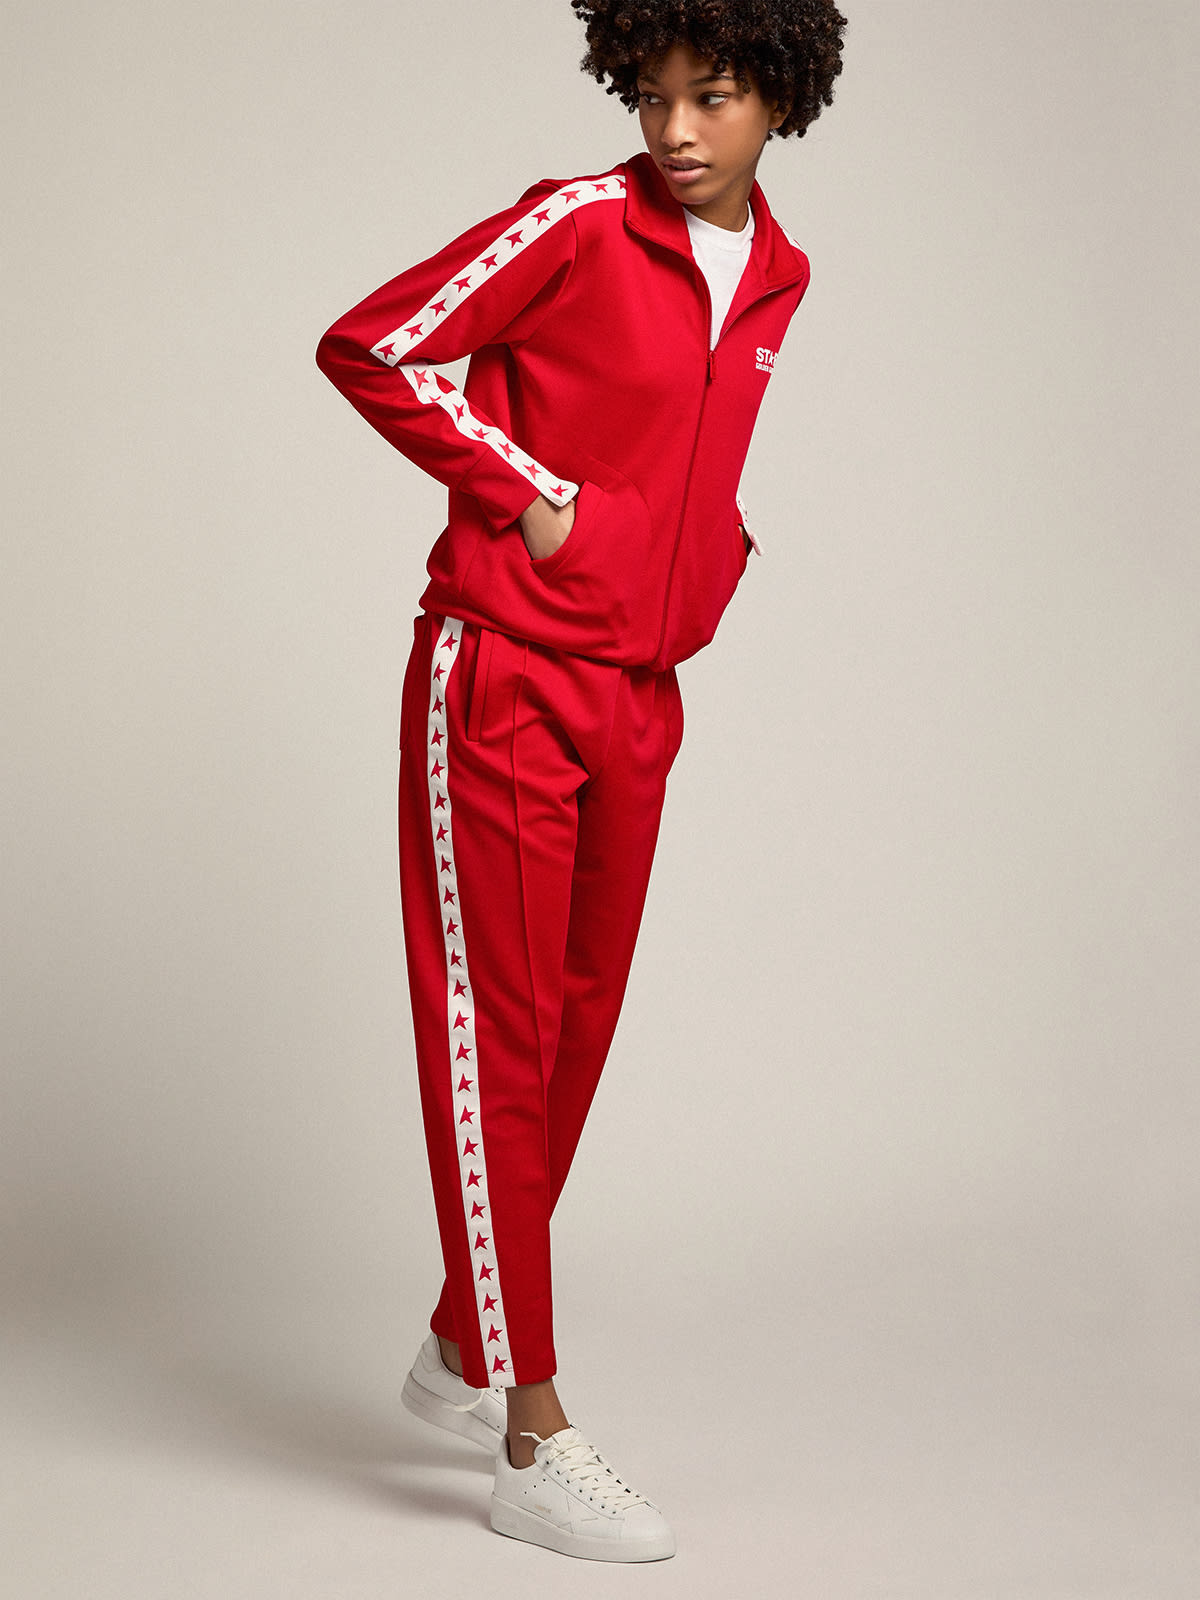 Golden Goose - Women’s red joggers with red stars on the sides in 